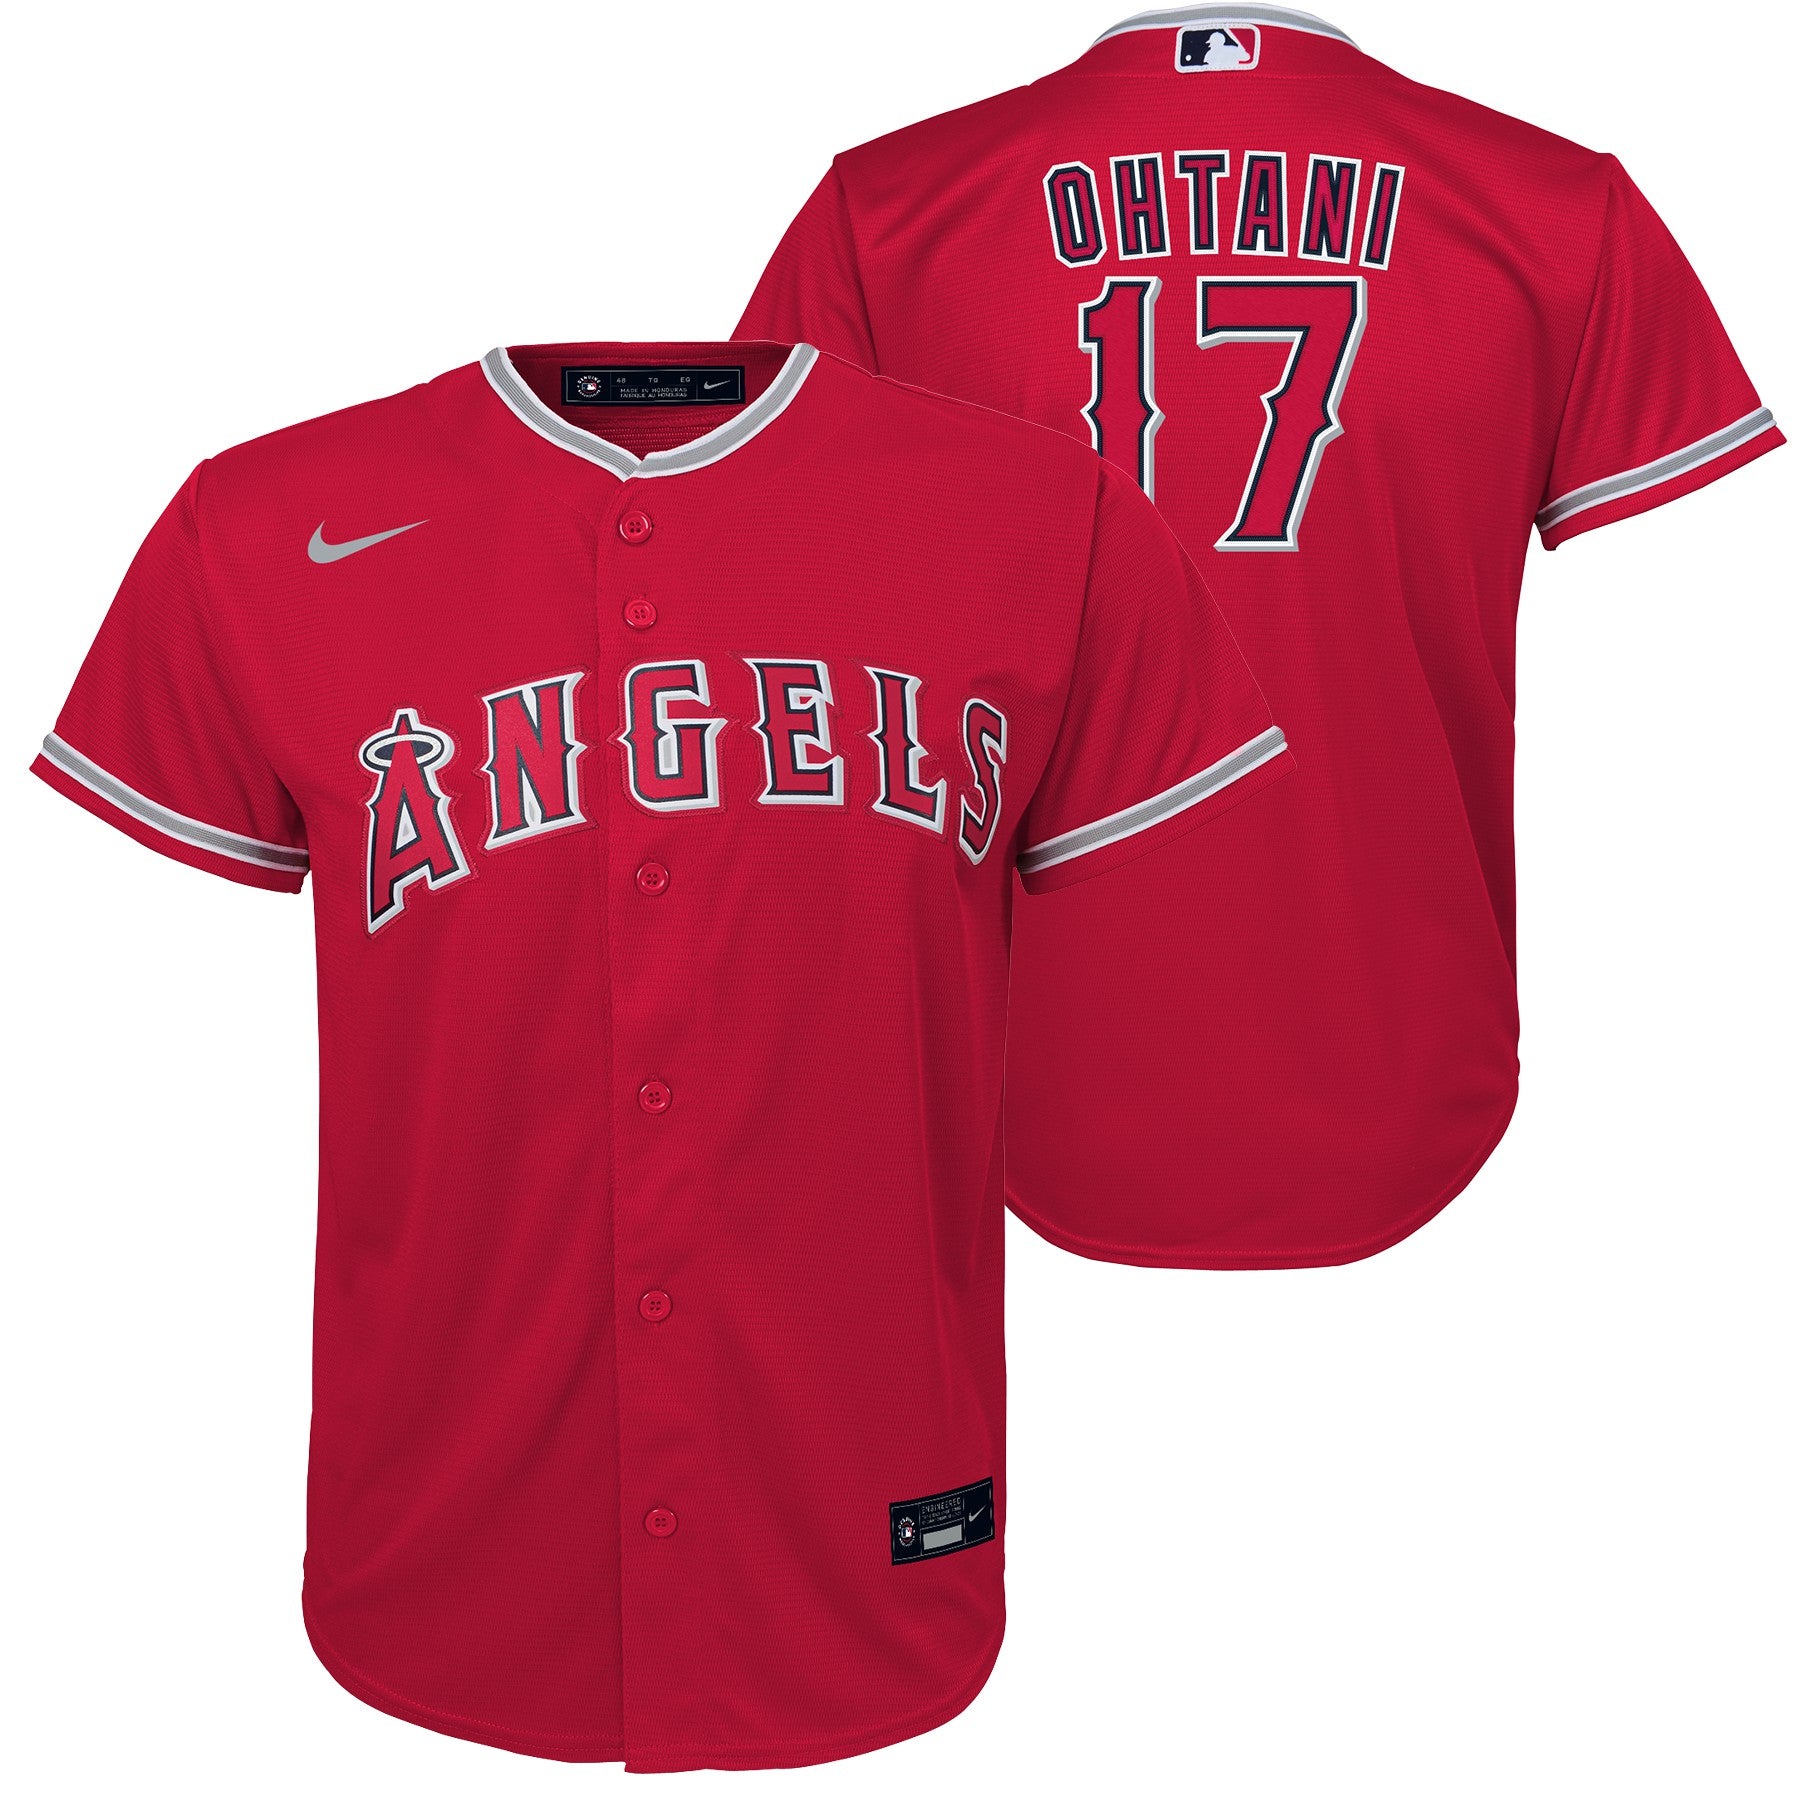 Shohei Ohtani Los Angeles Angels Nike Youth Alternate Replica Player Jersey  - White